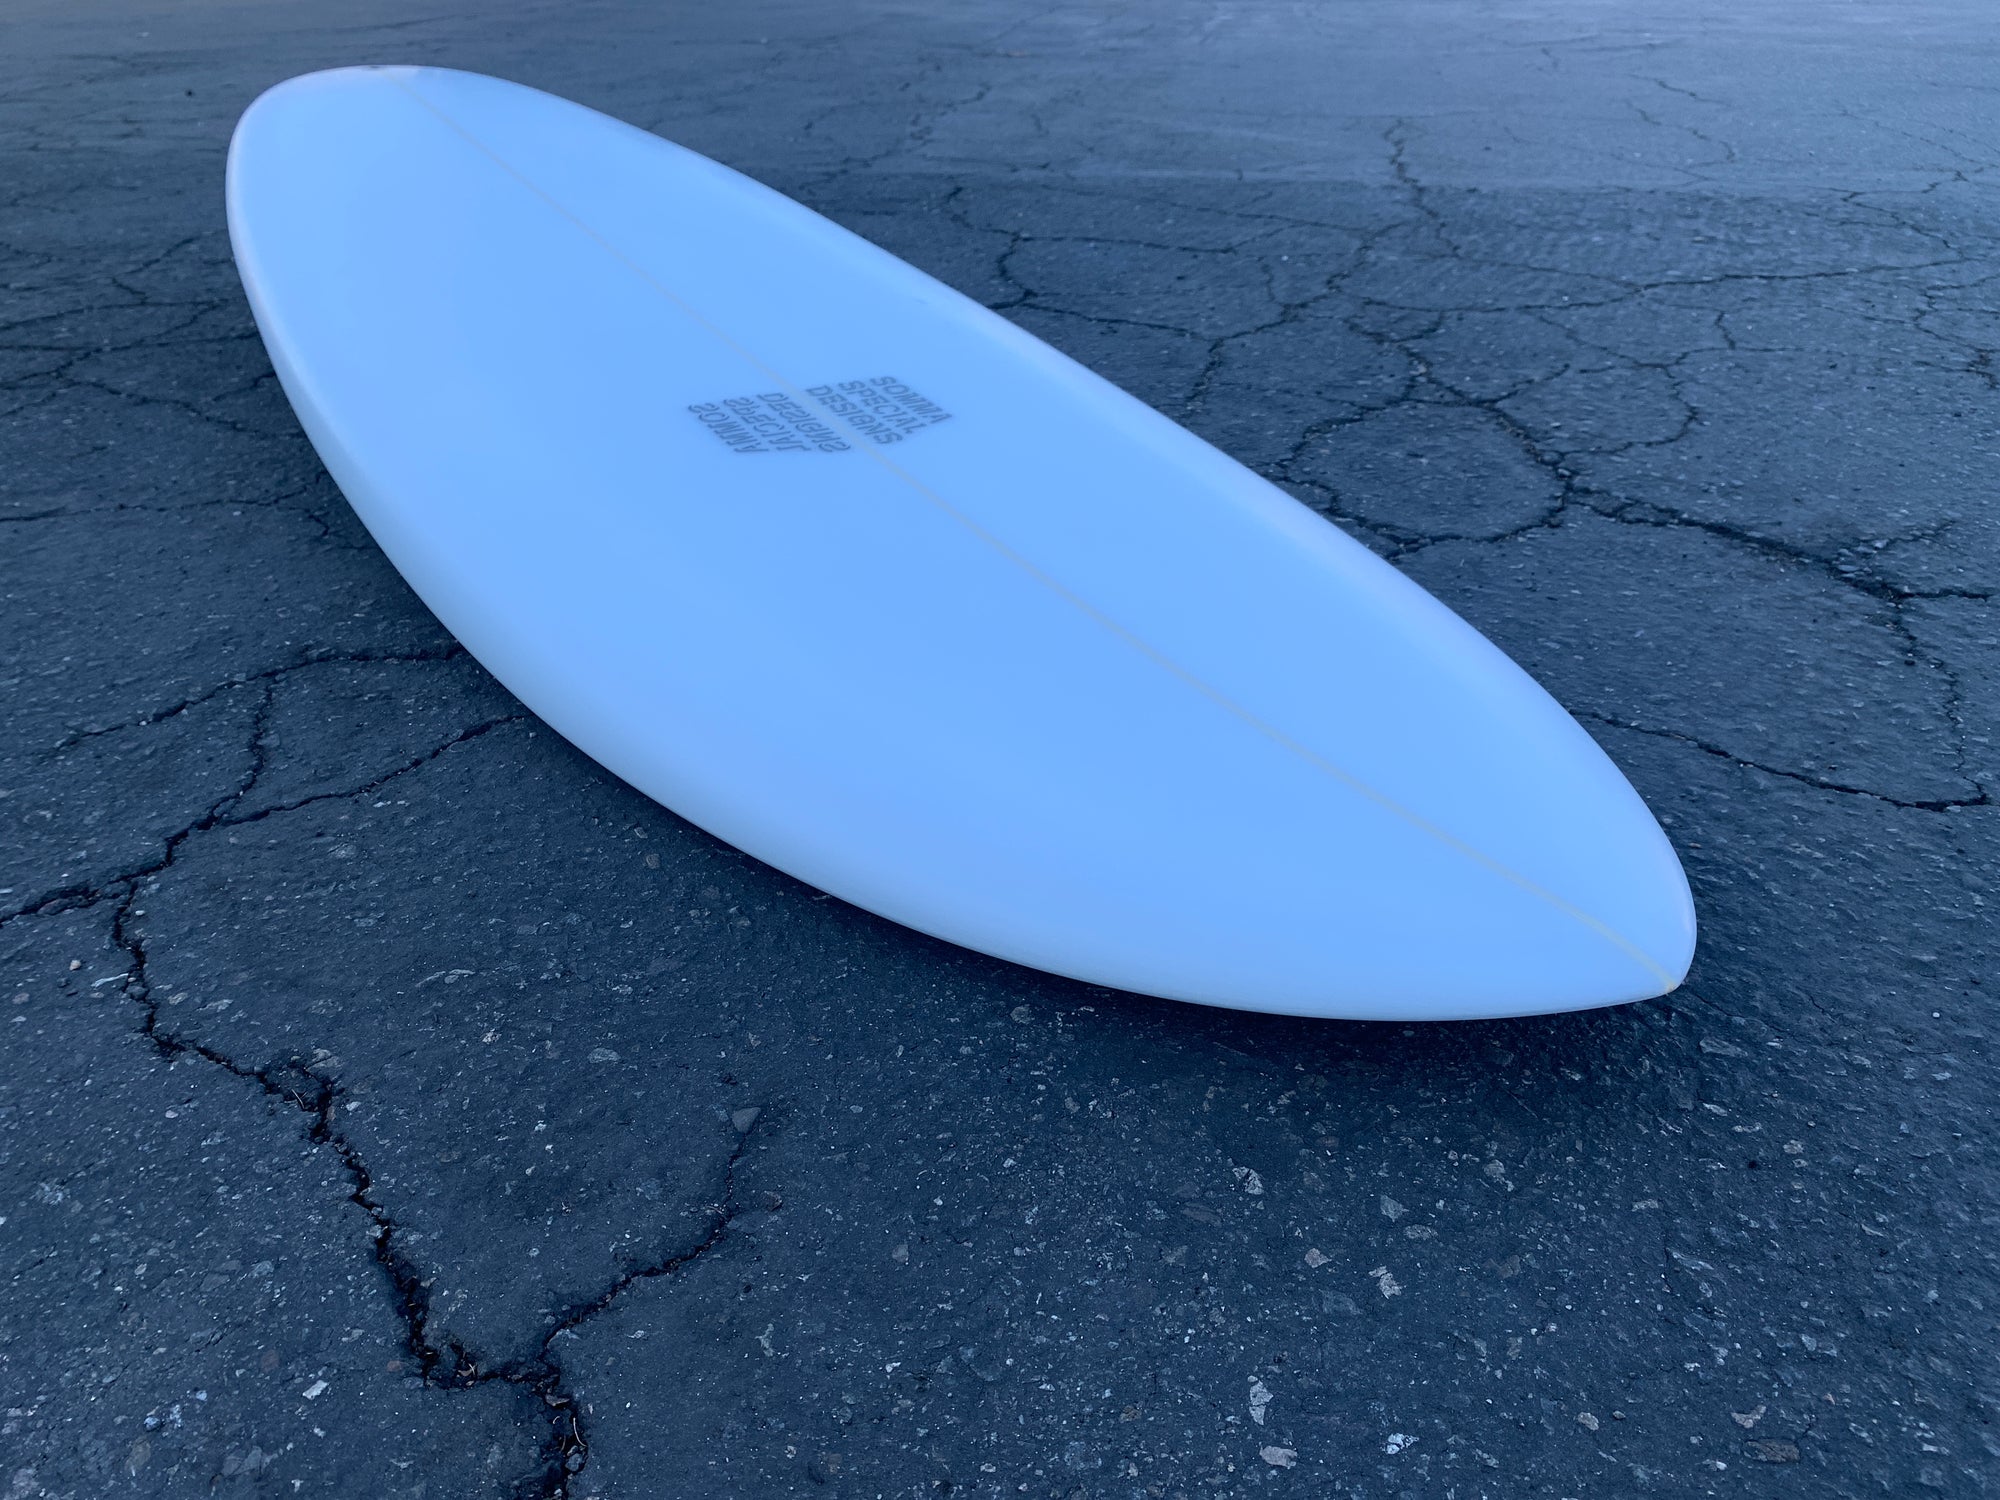 6&#39;0&quot; Somma Special Designs Daydream Twin Egg